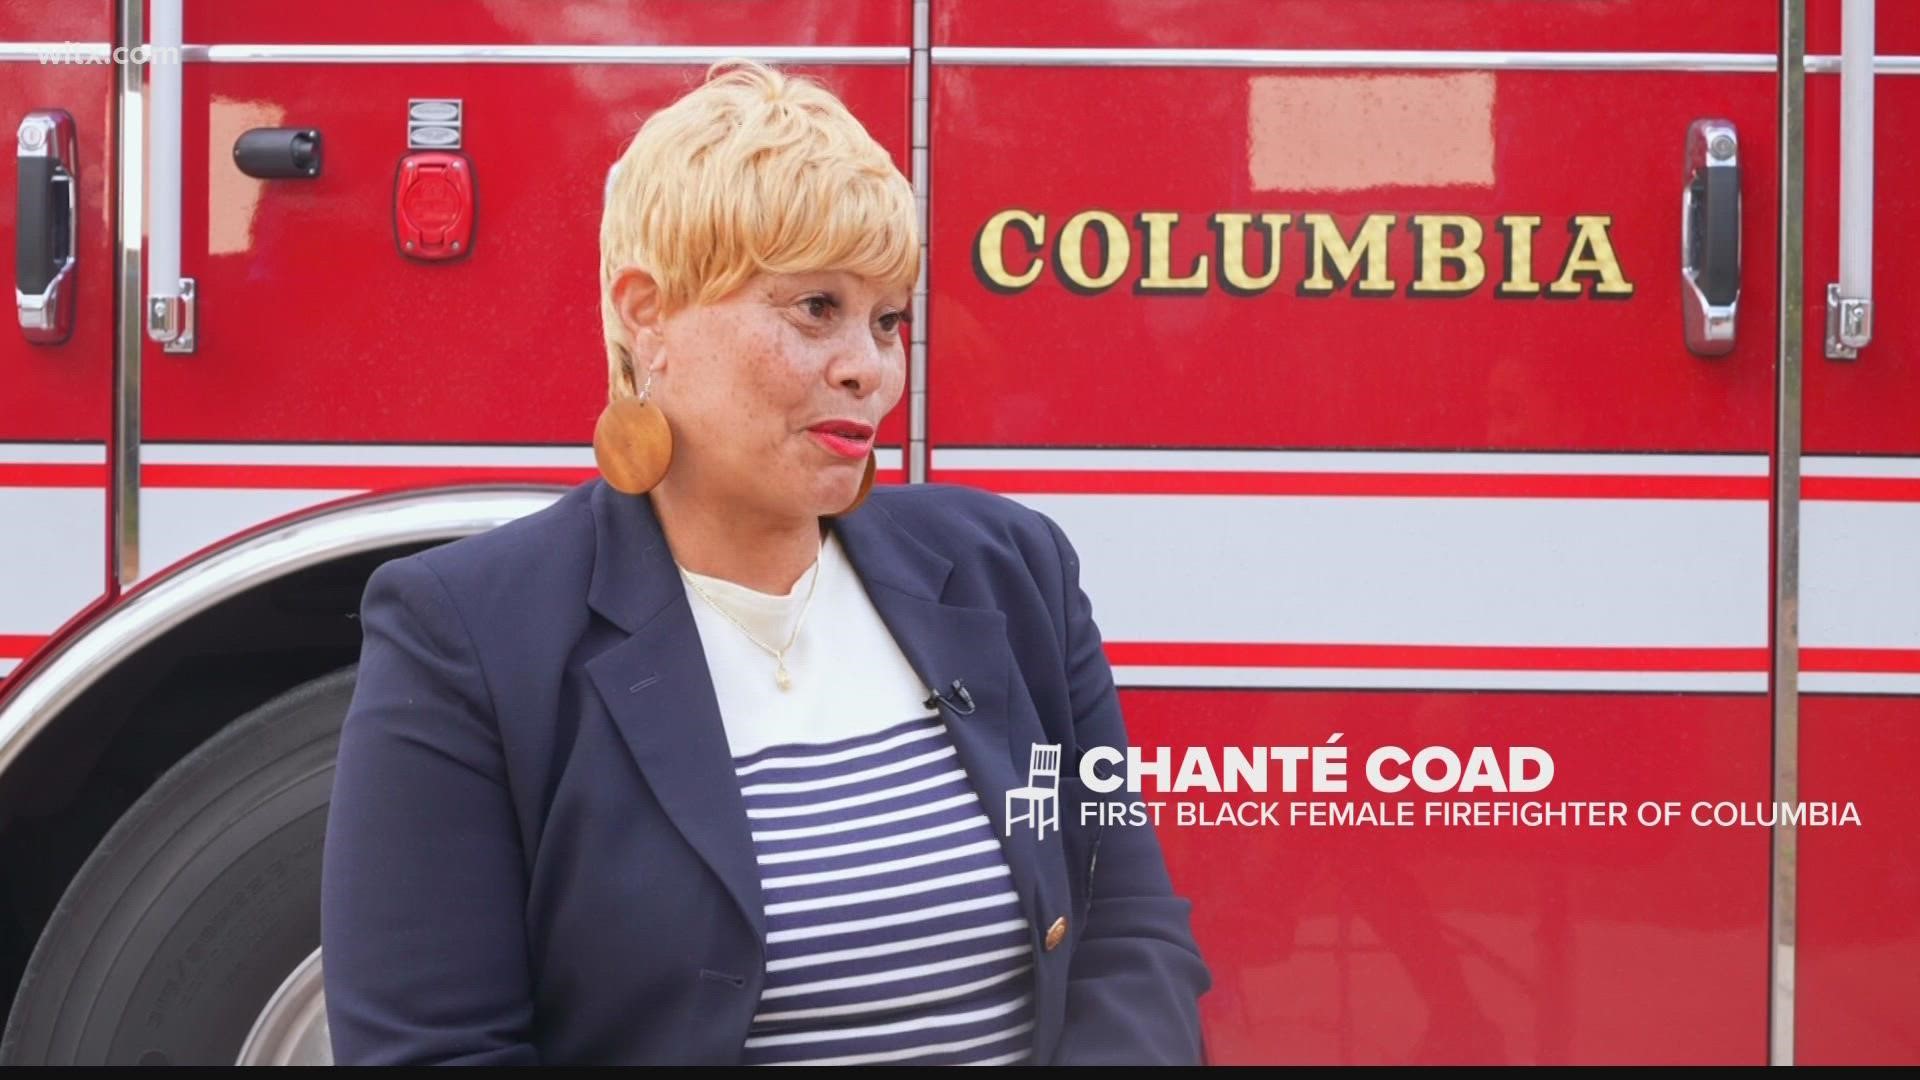 It's a story not many people know, but deserves to be told. Coad is Columbia Fire Department's first Black female firefighter.